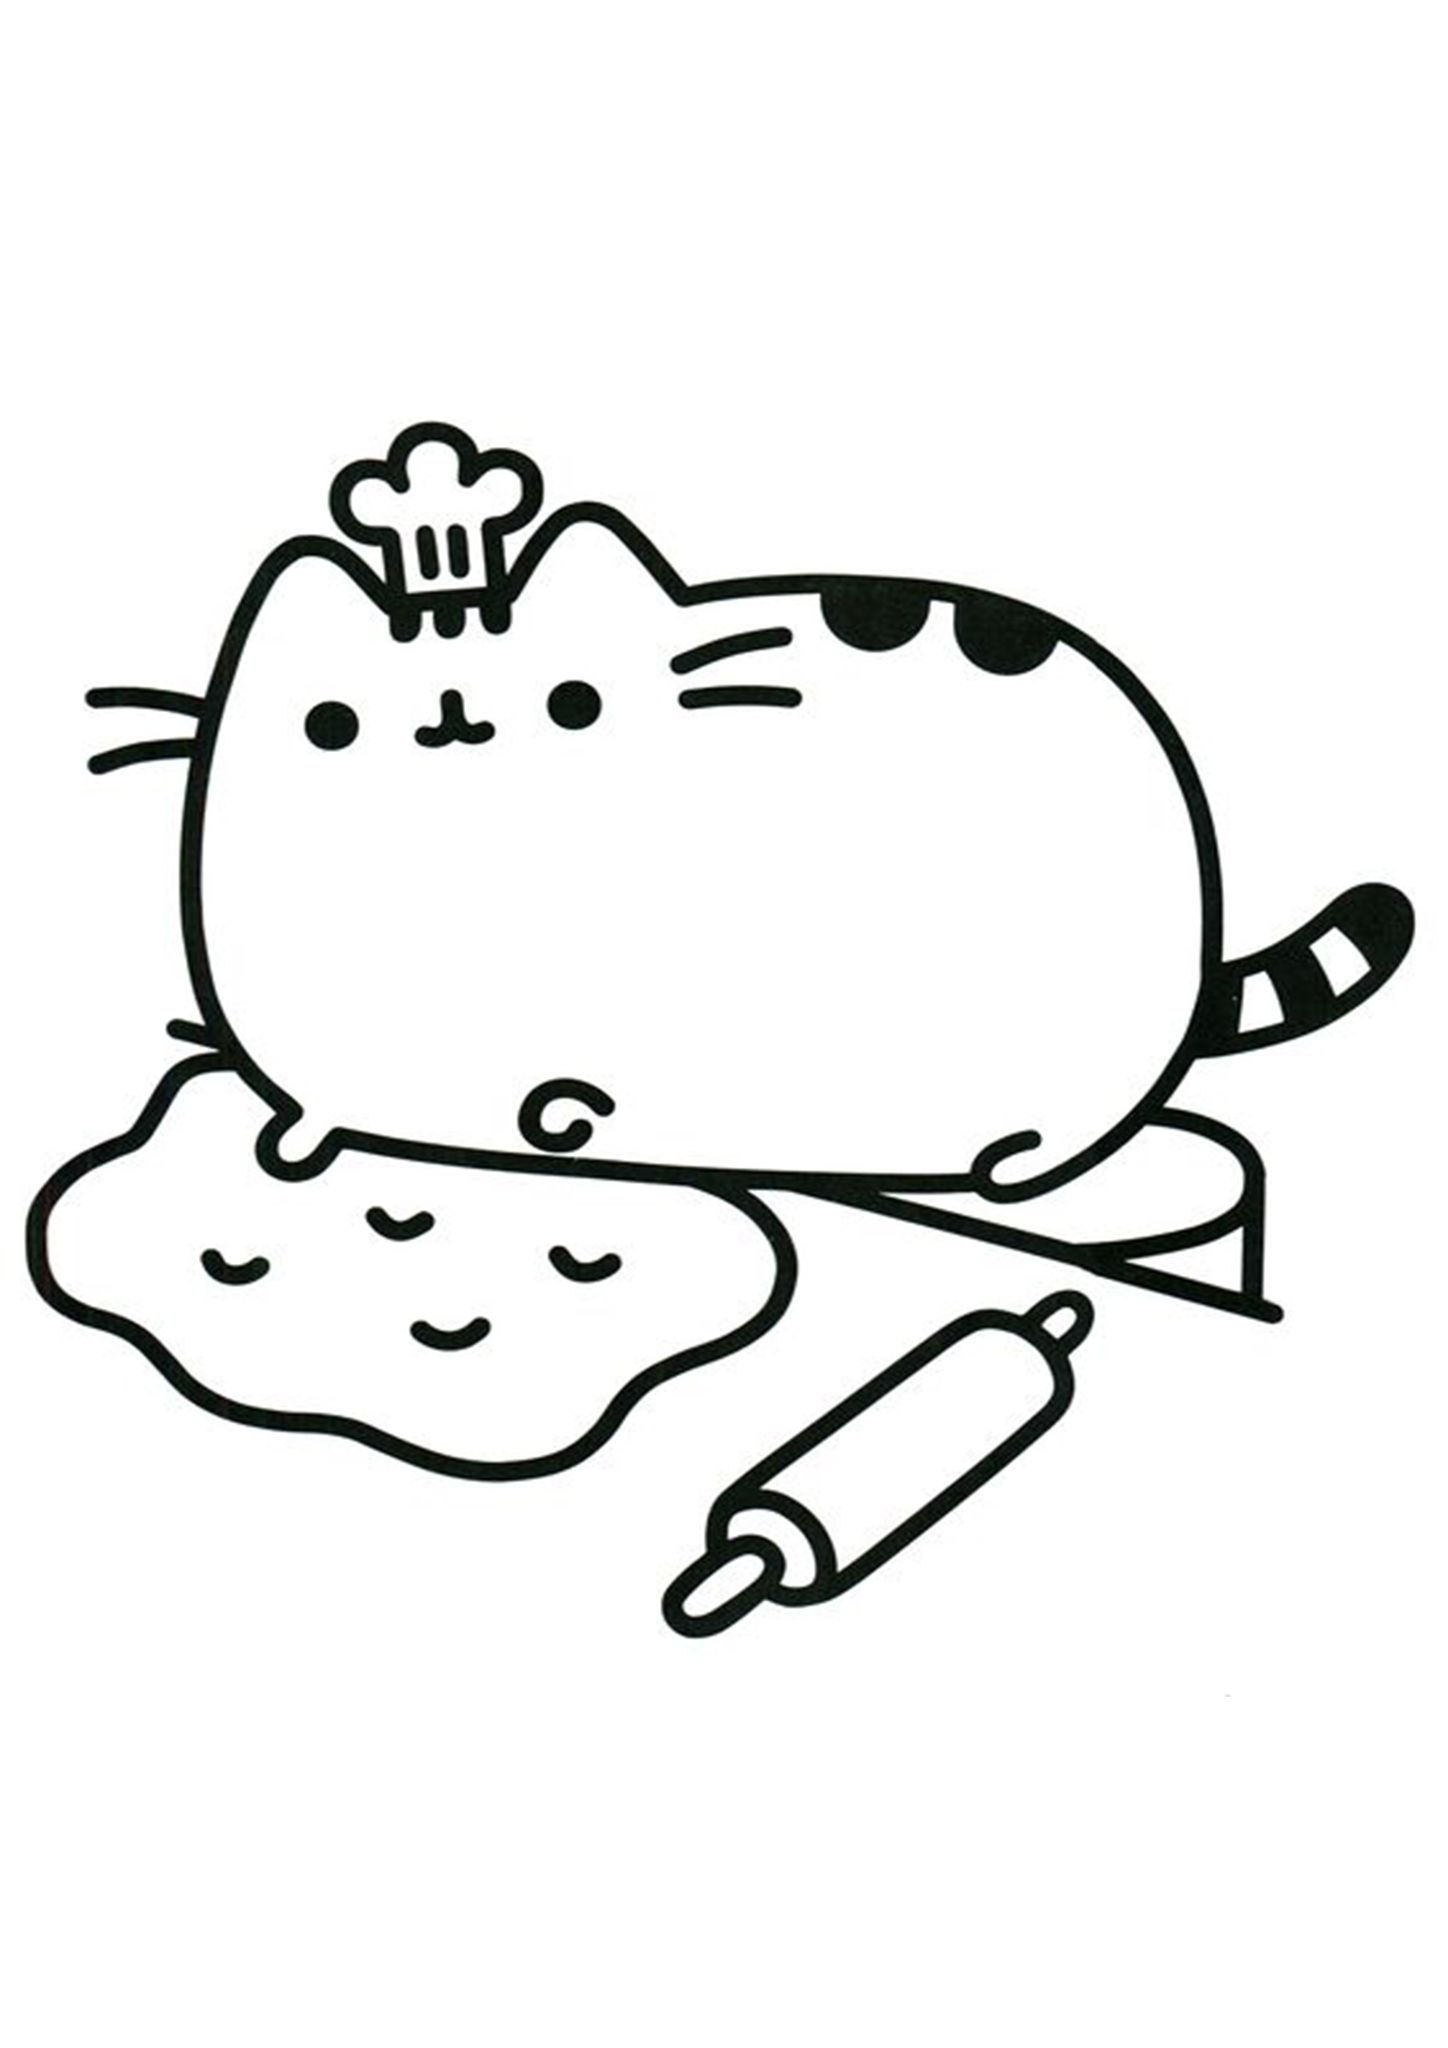 Free easy to print pusheen coloring pages pusheen coloring pages cat coloring page coloring pages